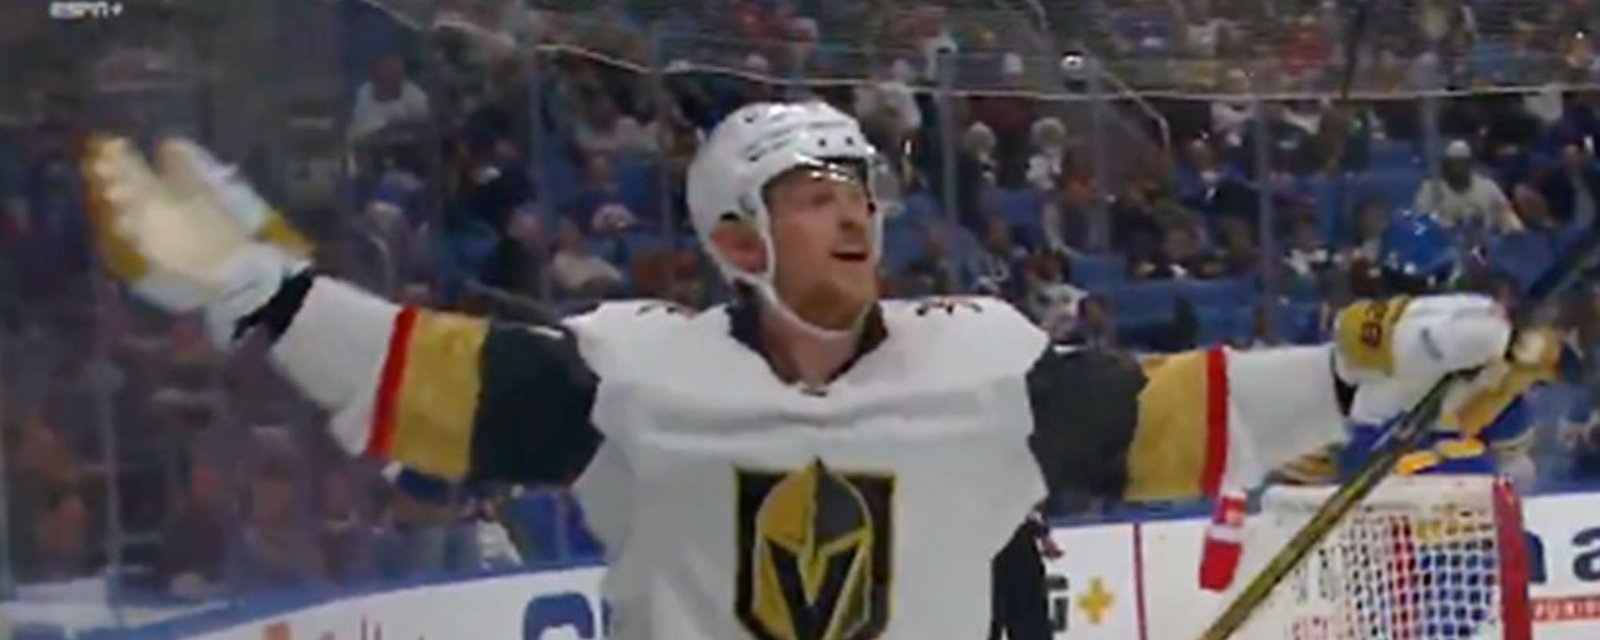 Jack Eichel is FIRED UP after scoring a hat trick in Buffalo!